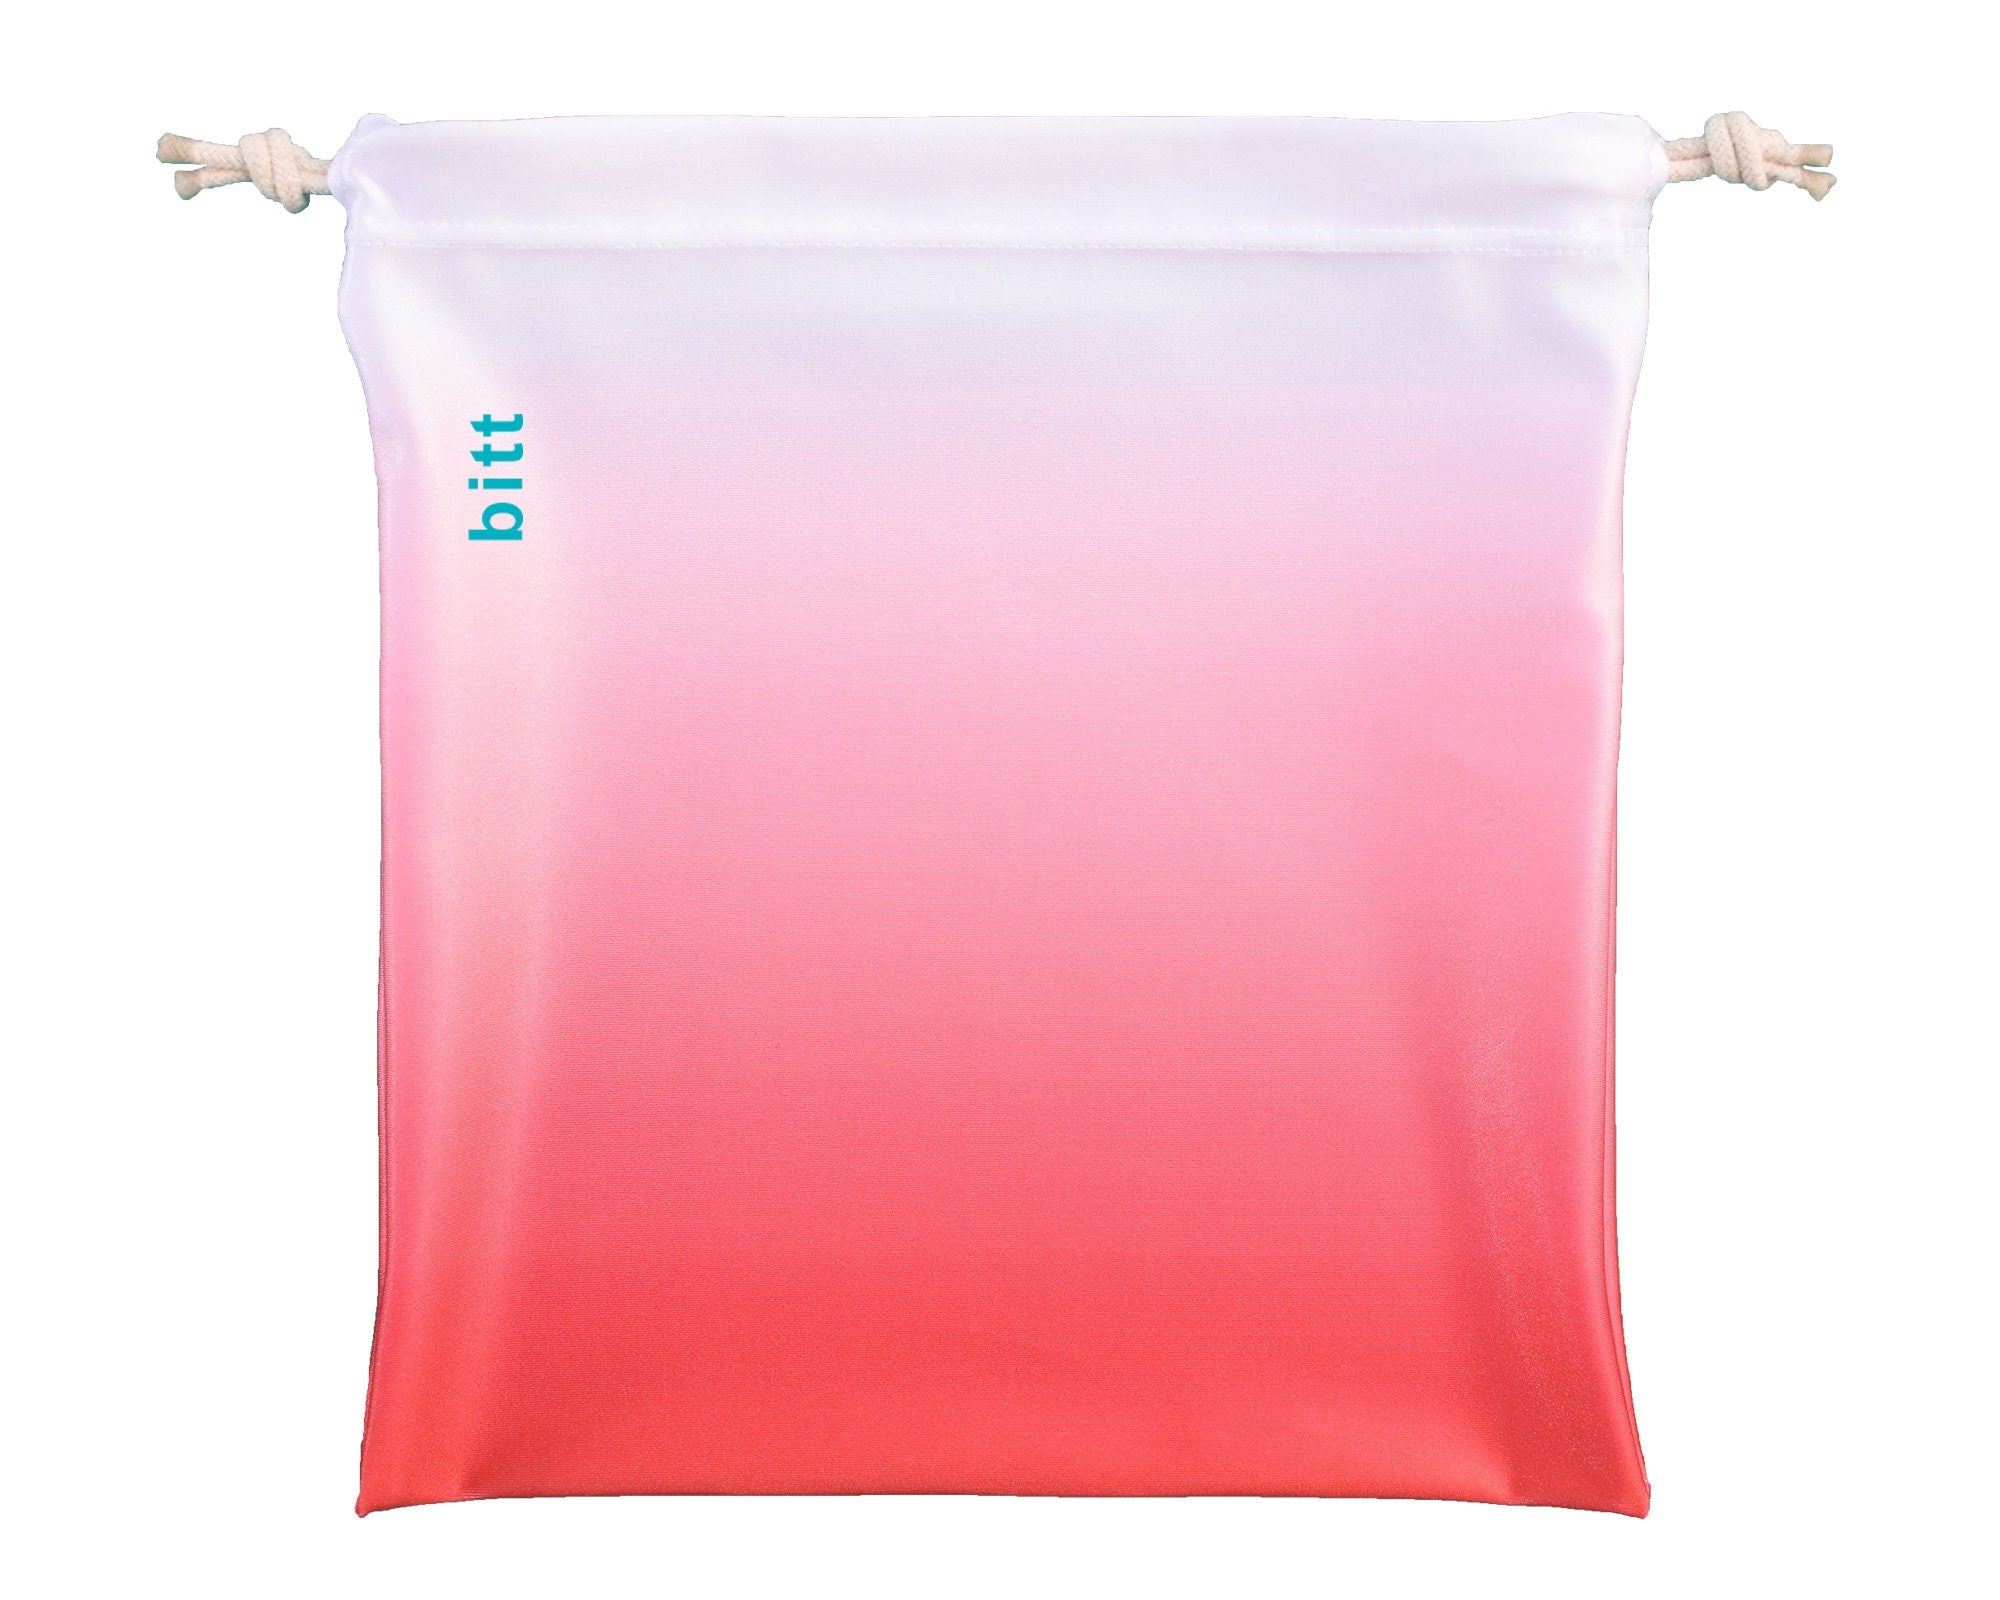 Gymnastics Grip Bag in Red & White Ombre